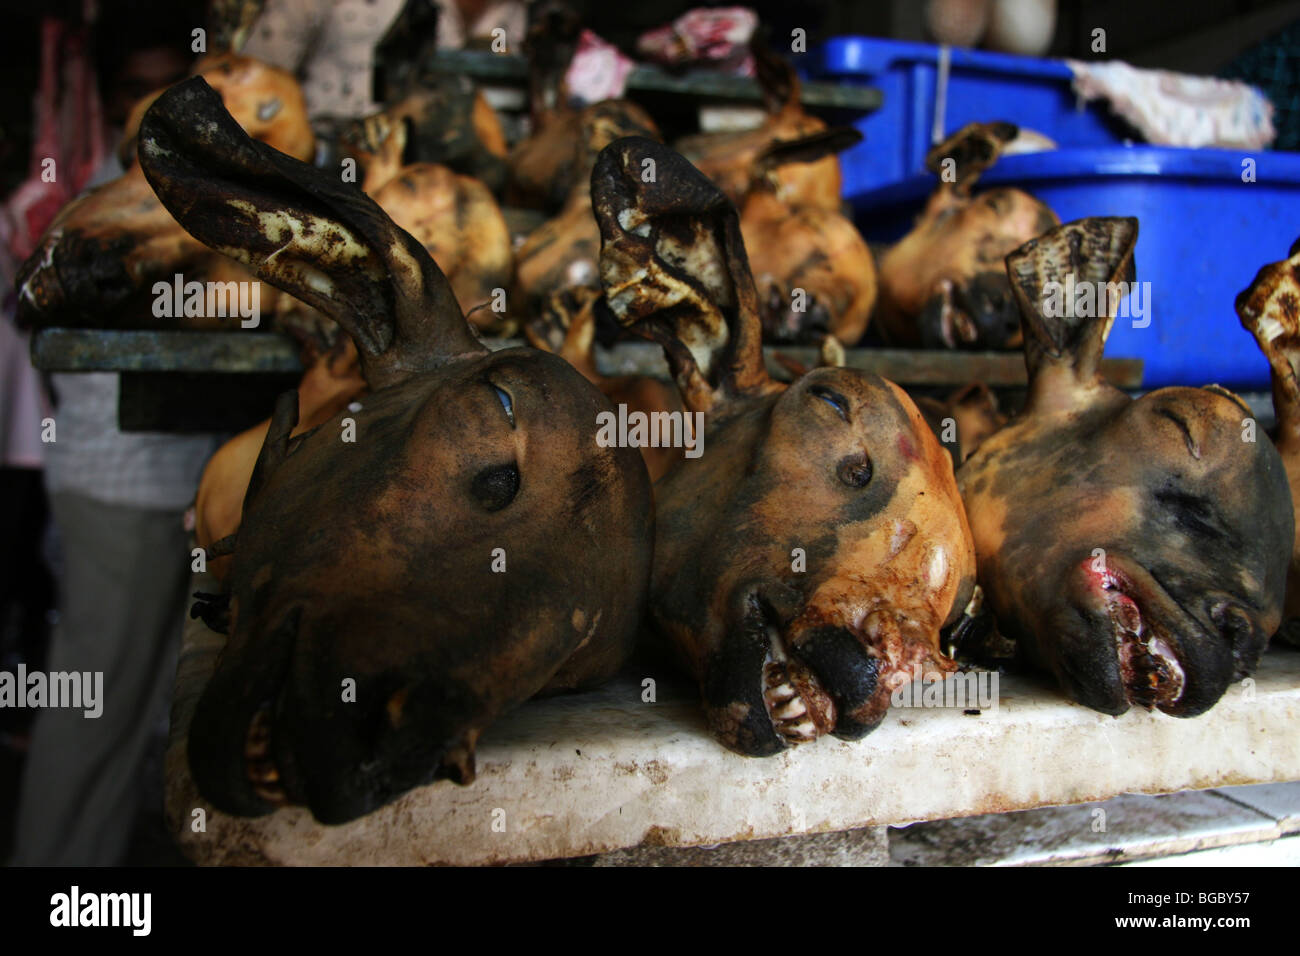 Seared sheep heads are offered for sale at a market in Bangalore, India. The heads are enjoyed as a local delicacy. Stock Photo